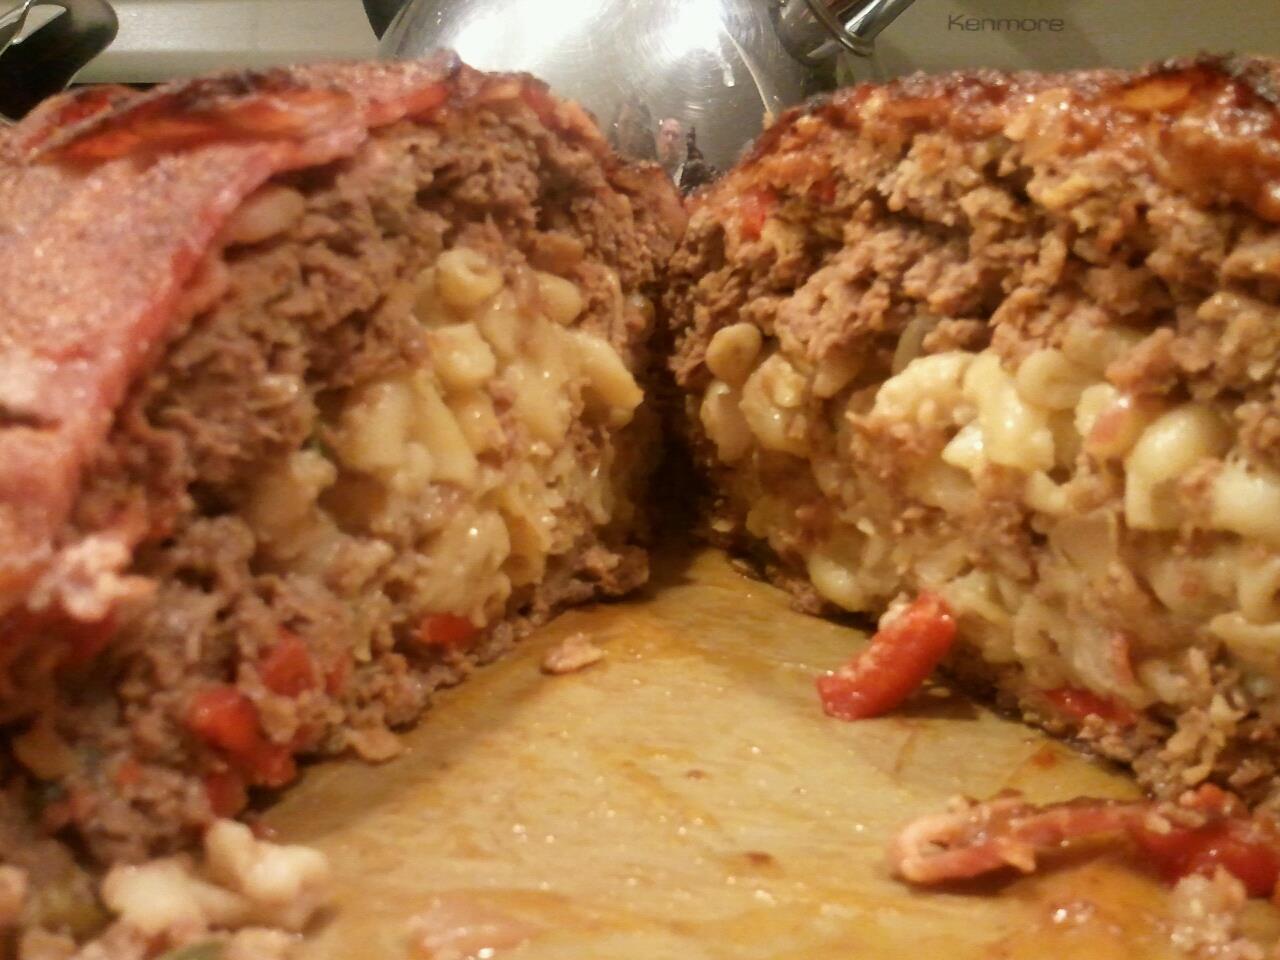 The Epic Meatloaf, cut 